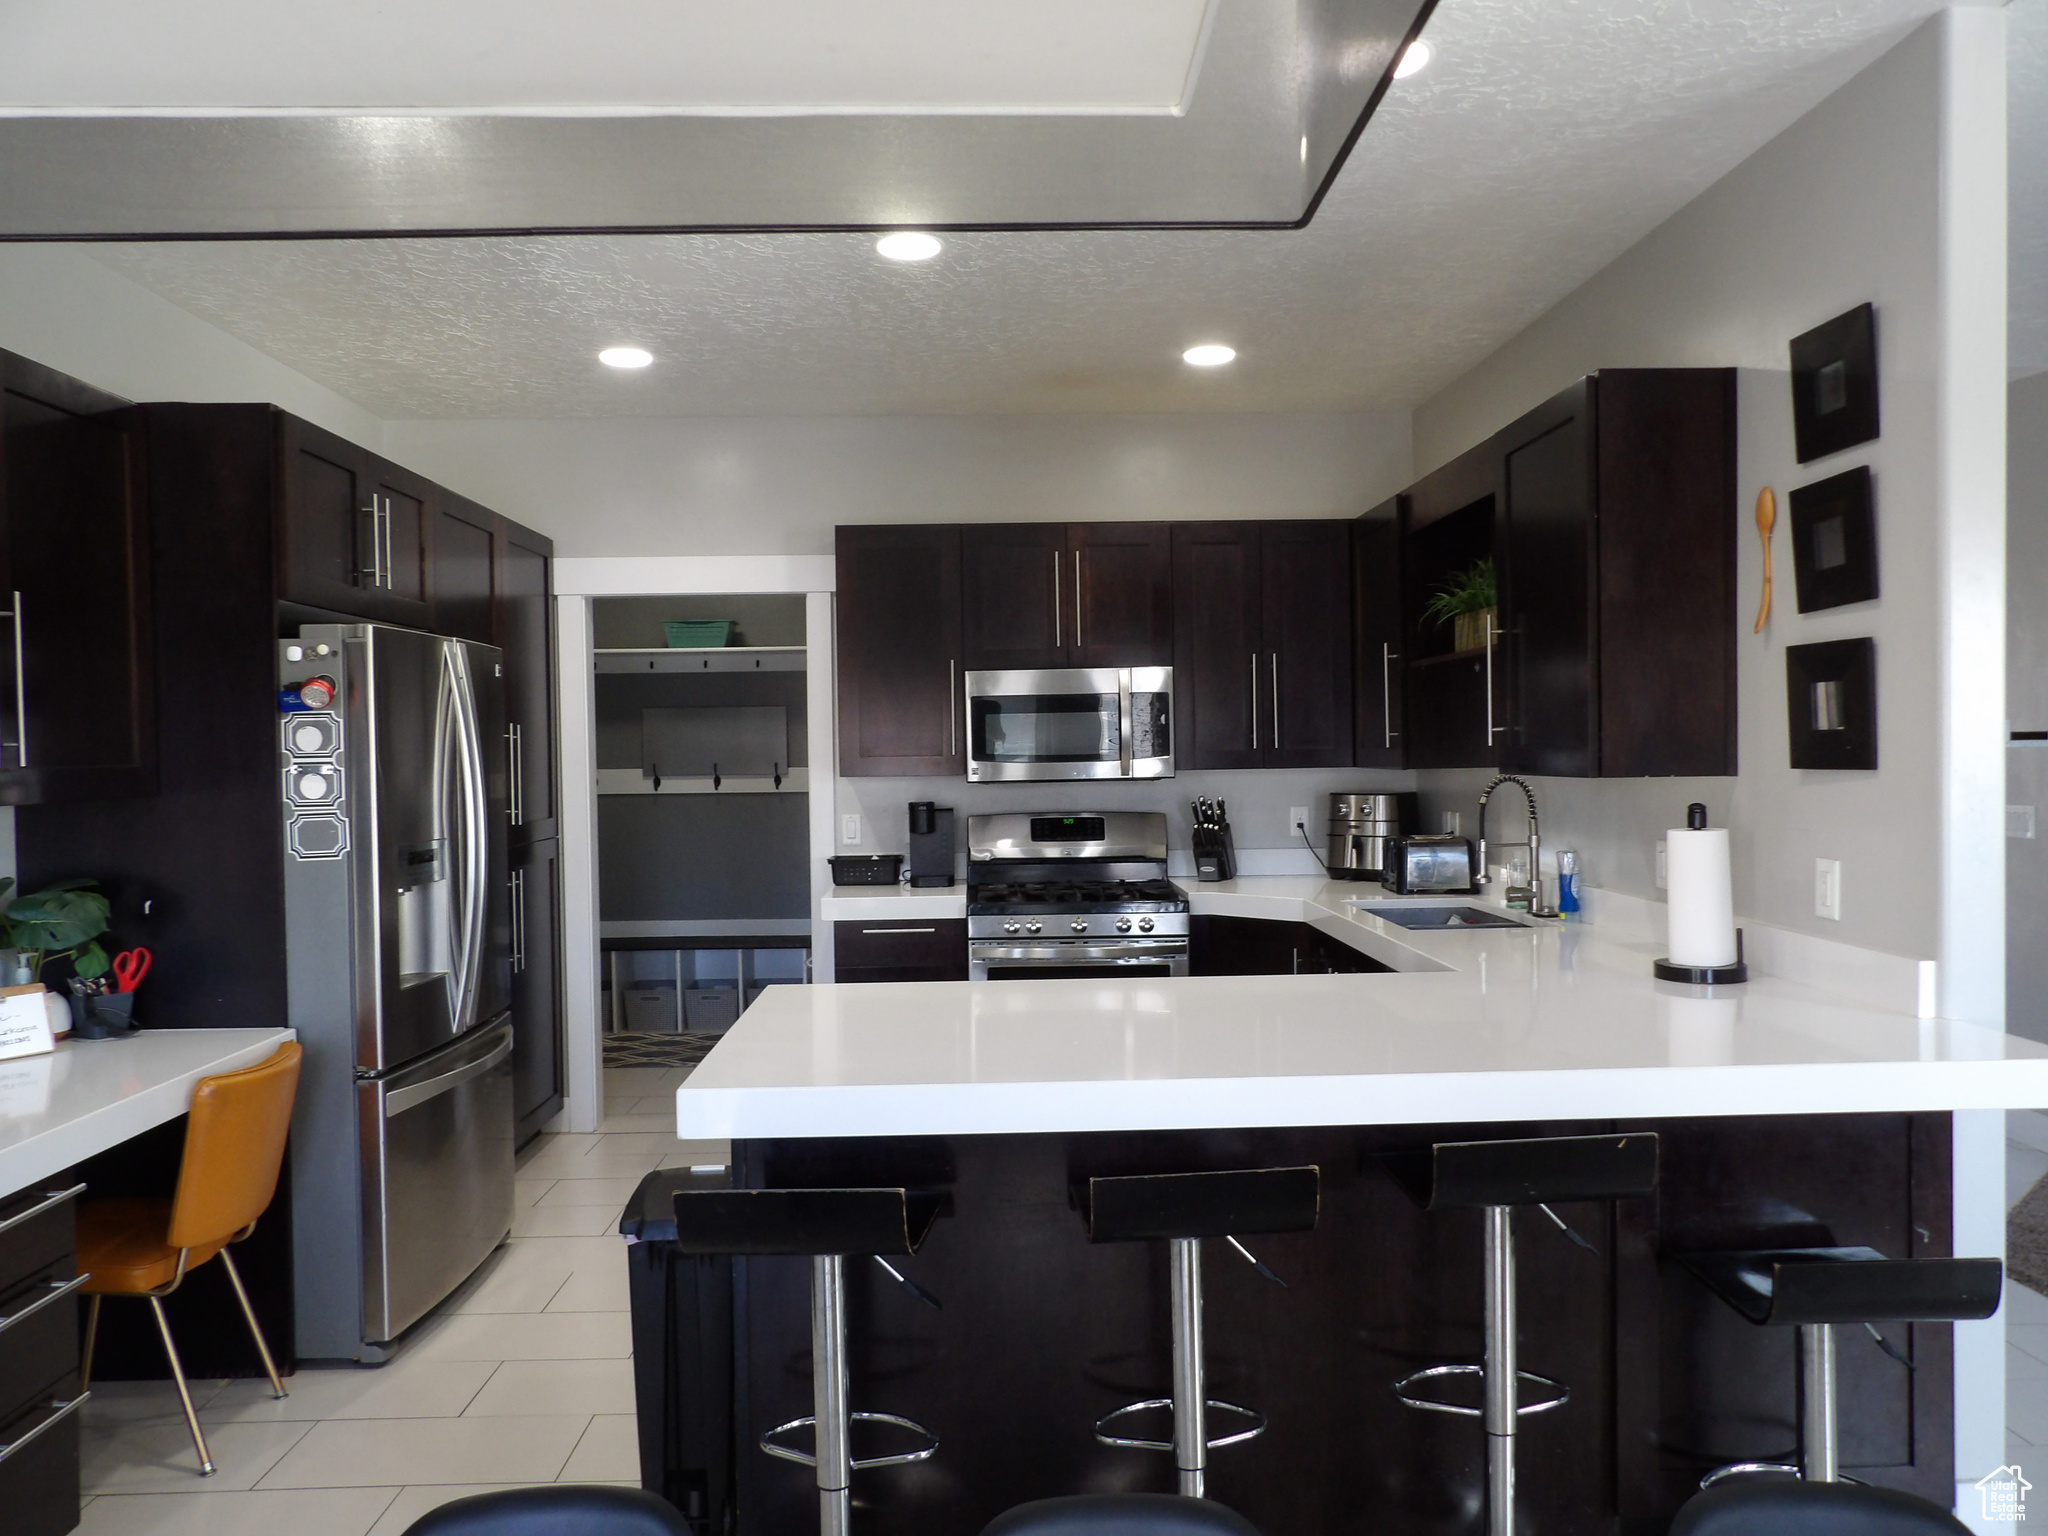 Kitchen with dark brown cabinets, light tile flooring, stainless steel appliances, a breakfast bar area, and sink